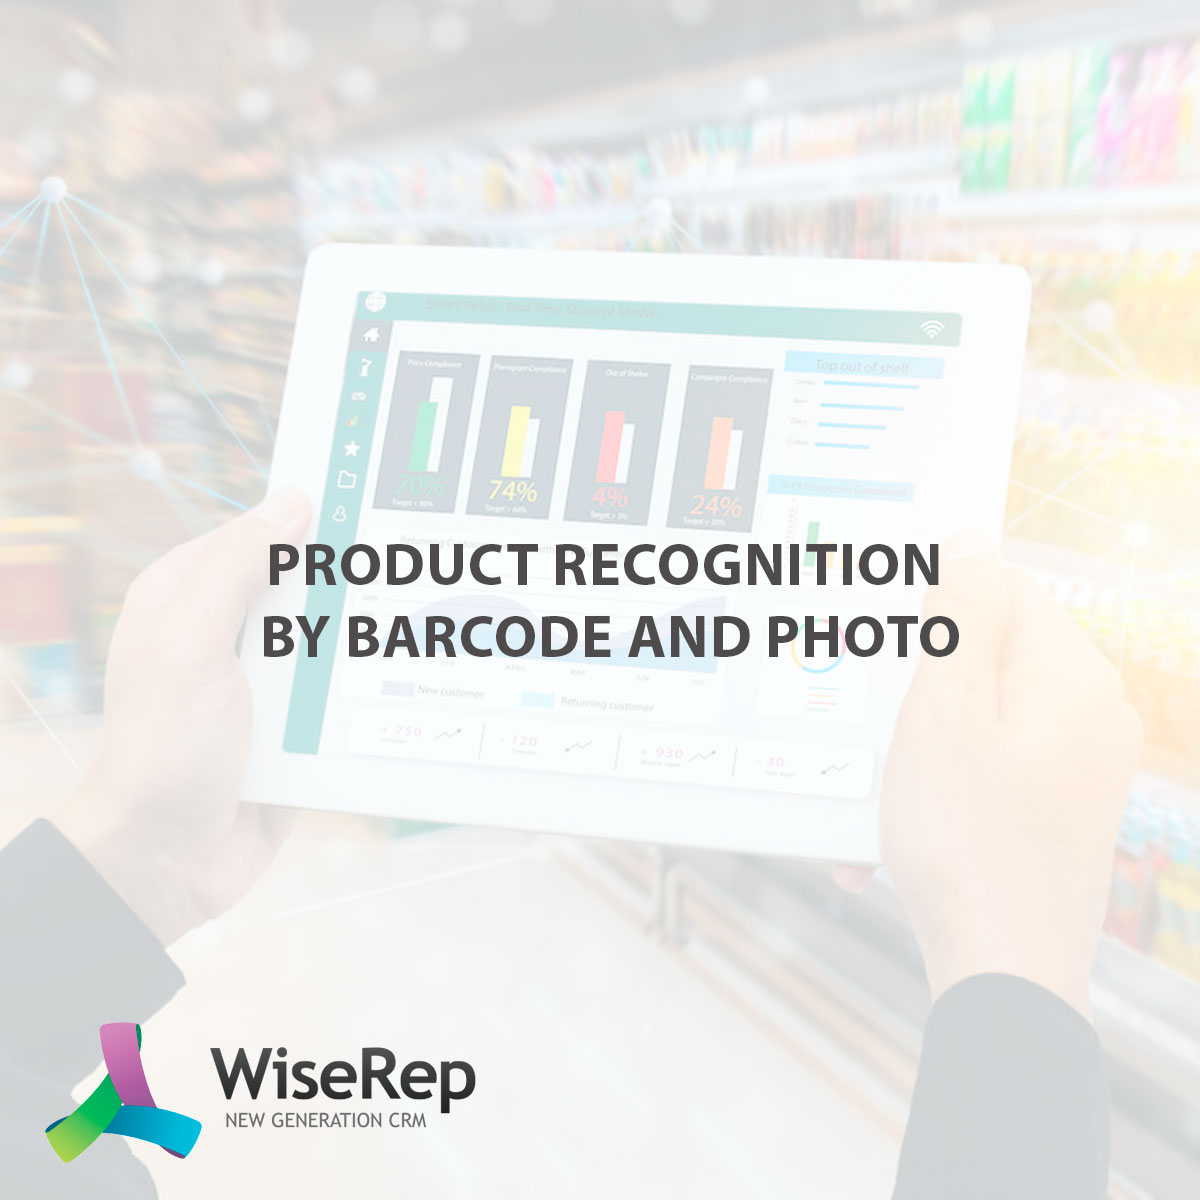 Product Recognition by Barcode and Photo